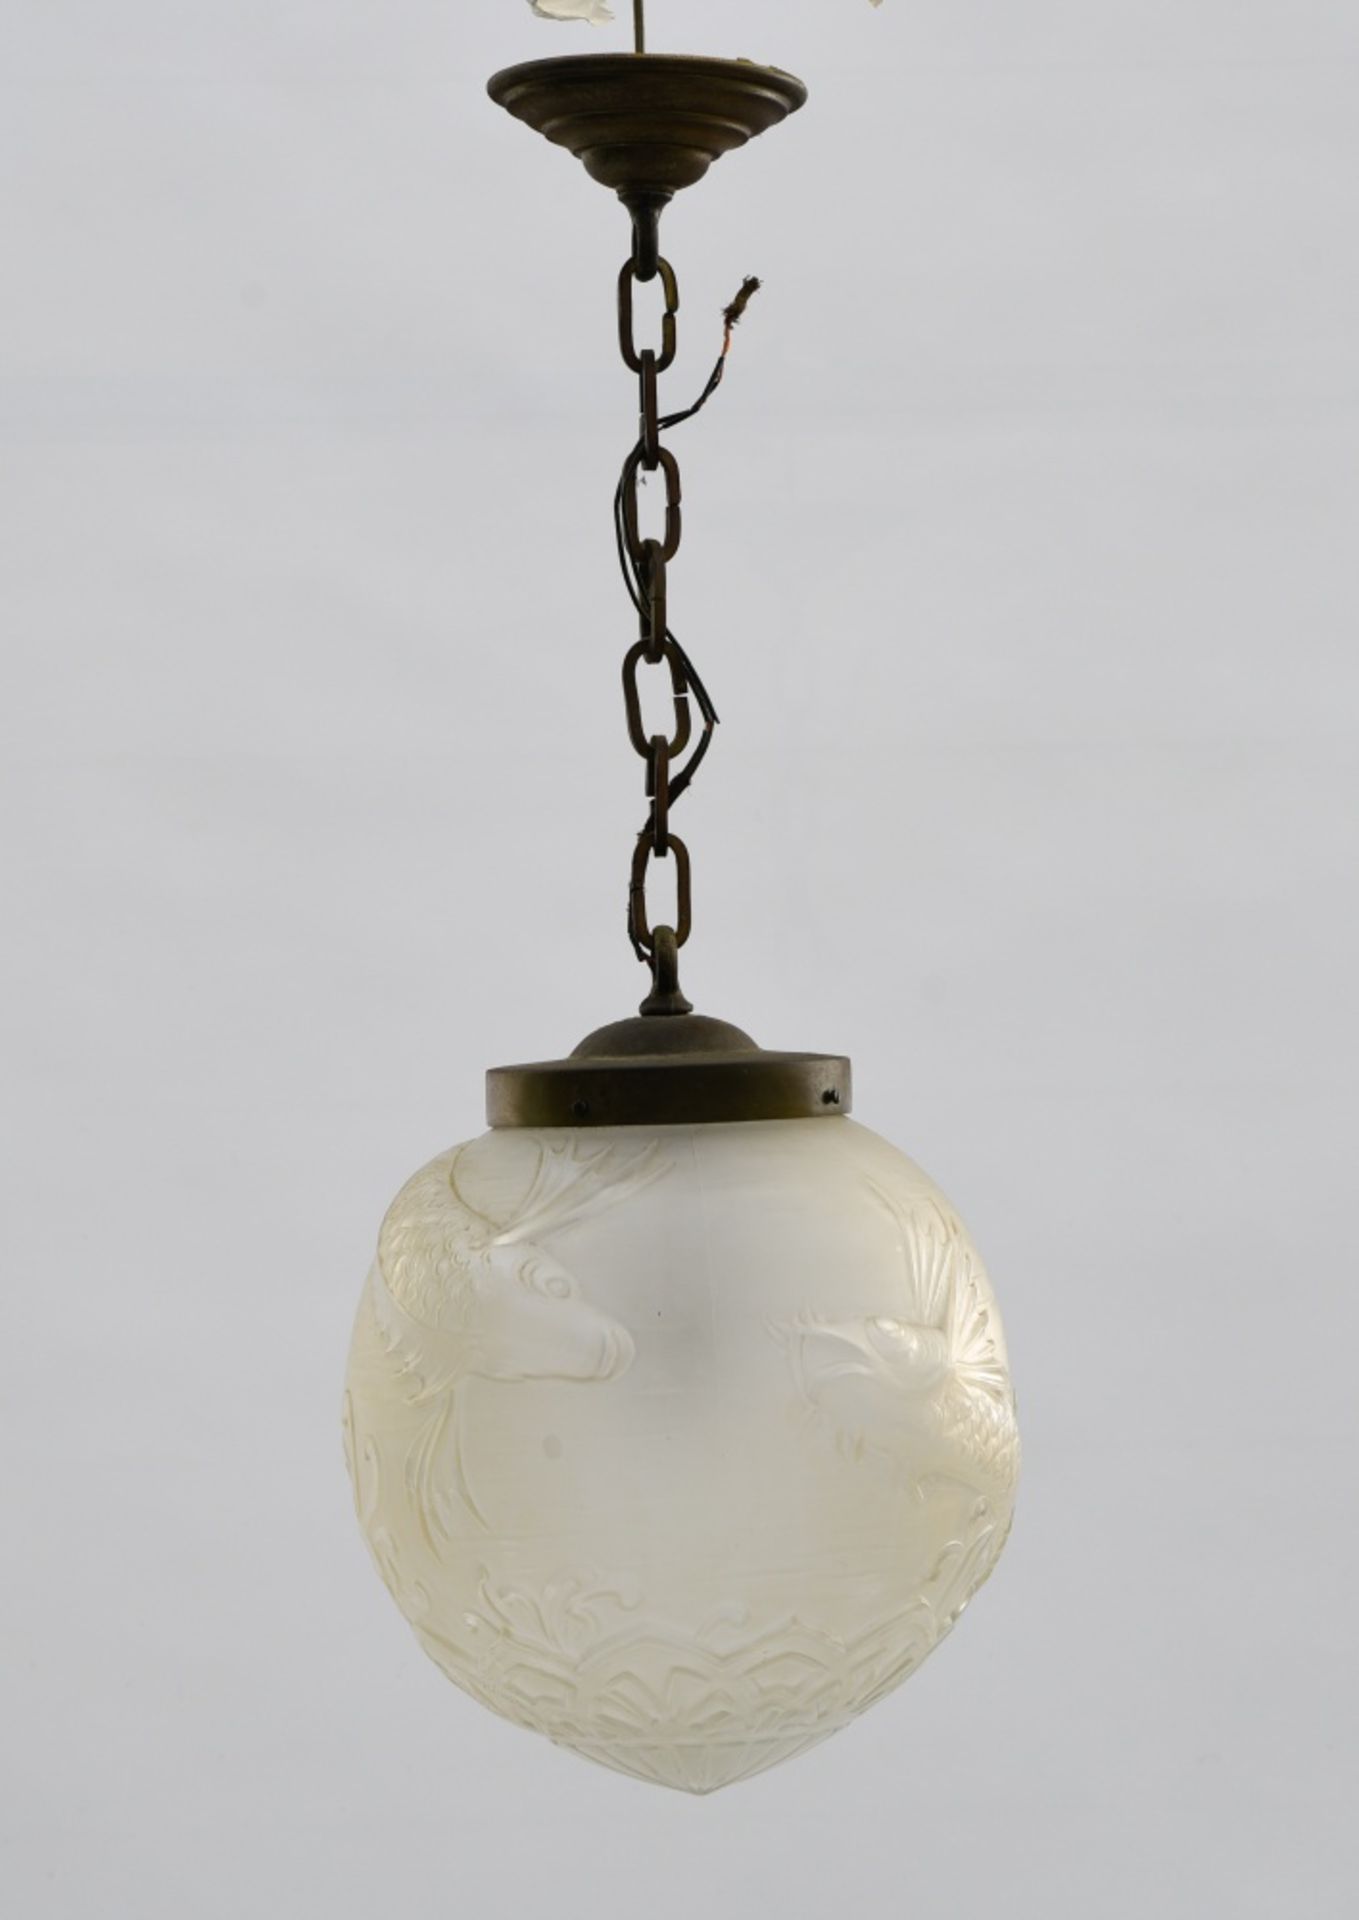 LORRAIN Carp hanging lamp, Moulded pressed glass, spherical. Signed. Height (cm) : 70 - -